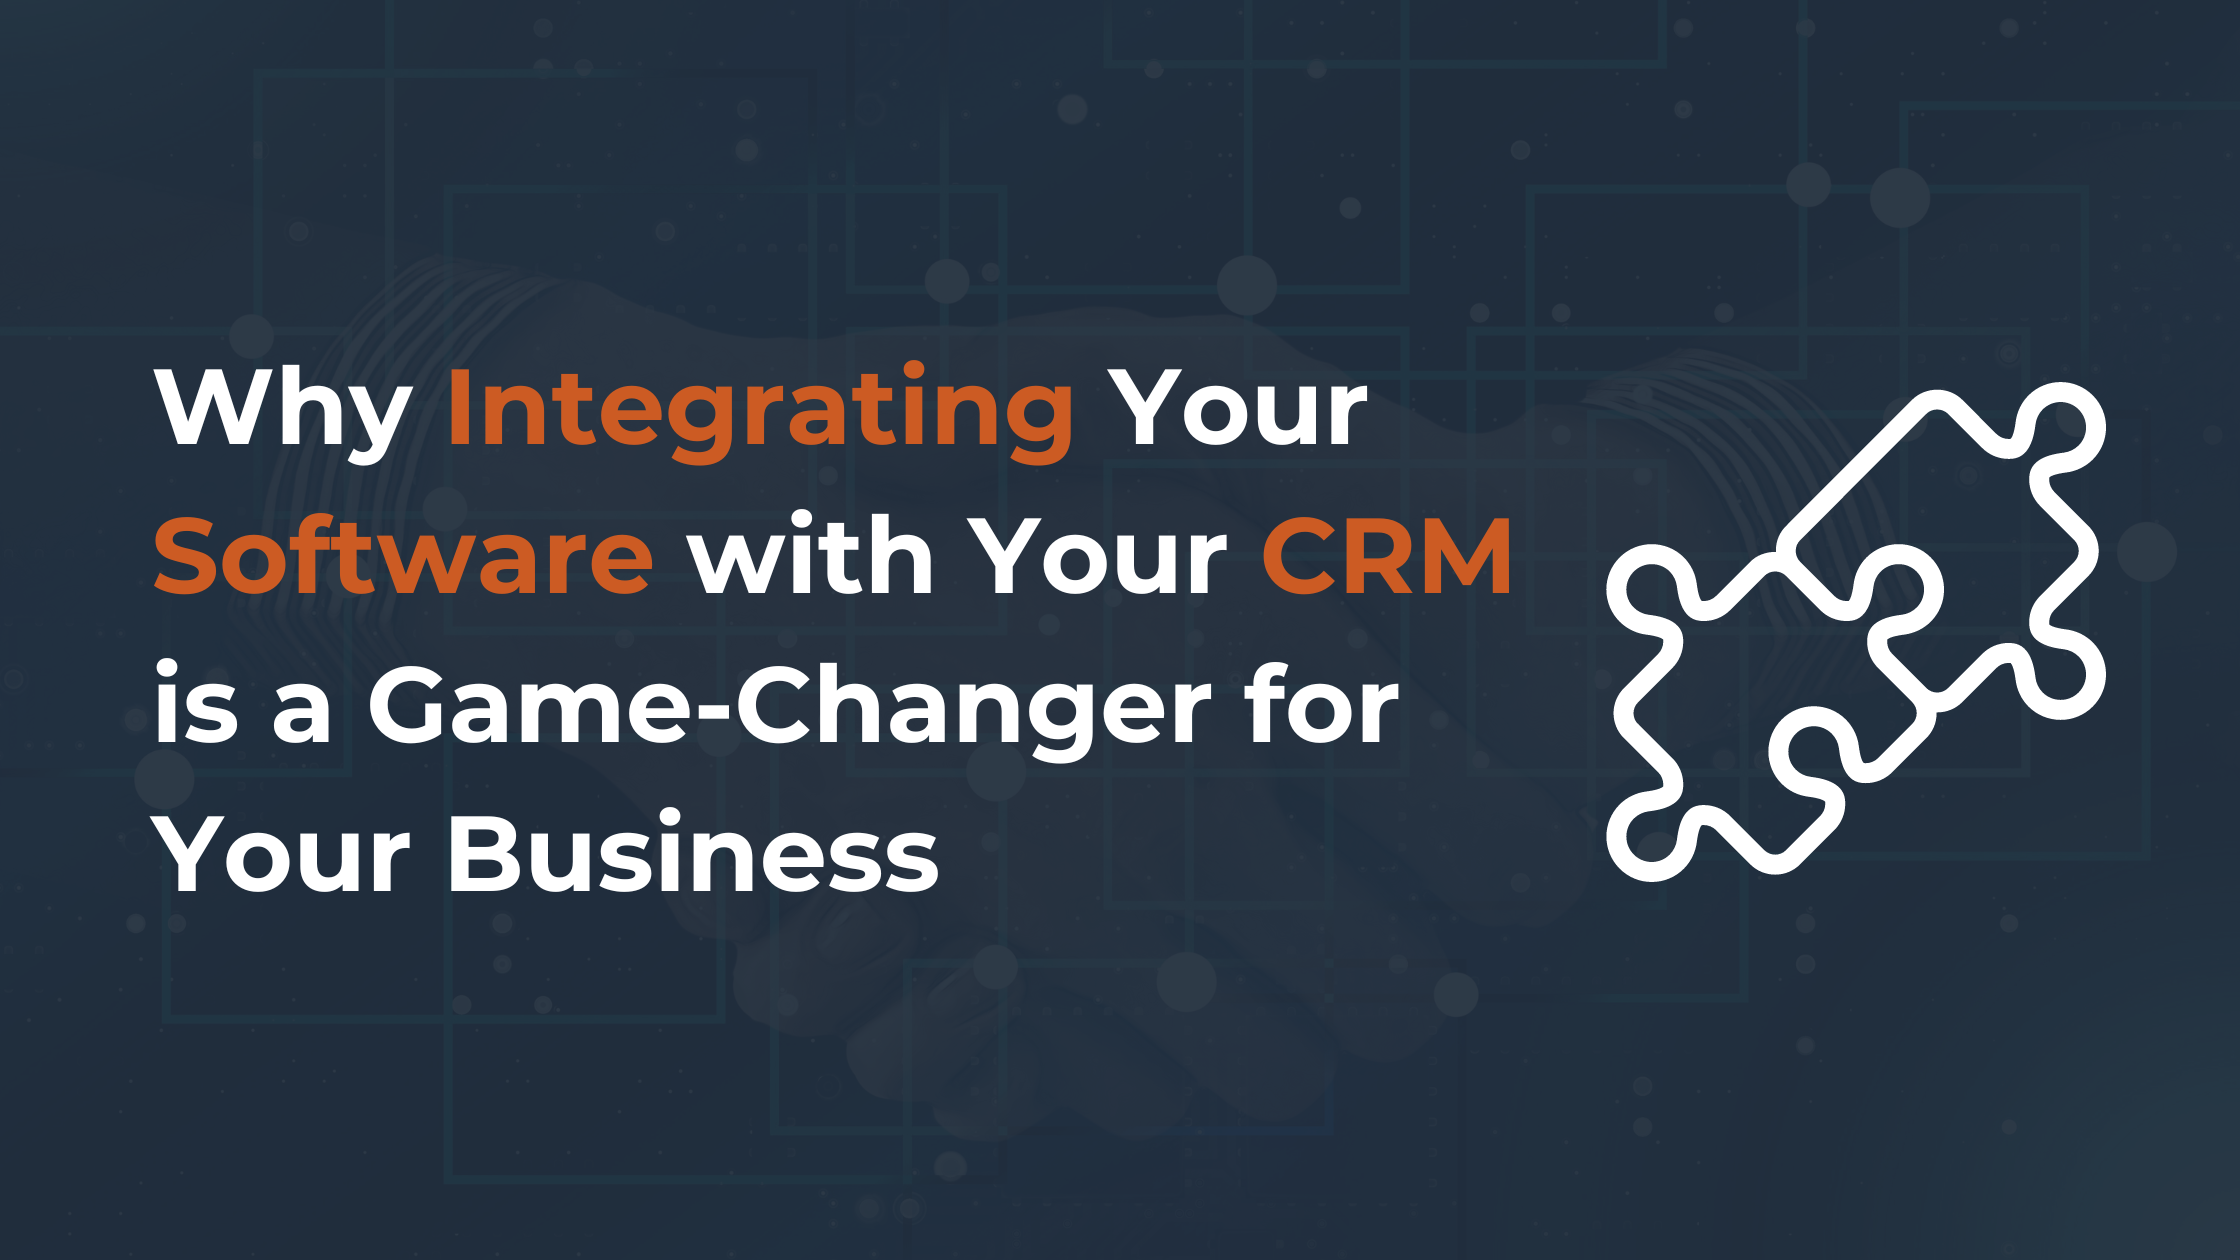 Why Integrating Your Software with Your CRM is a Game-Changer